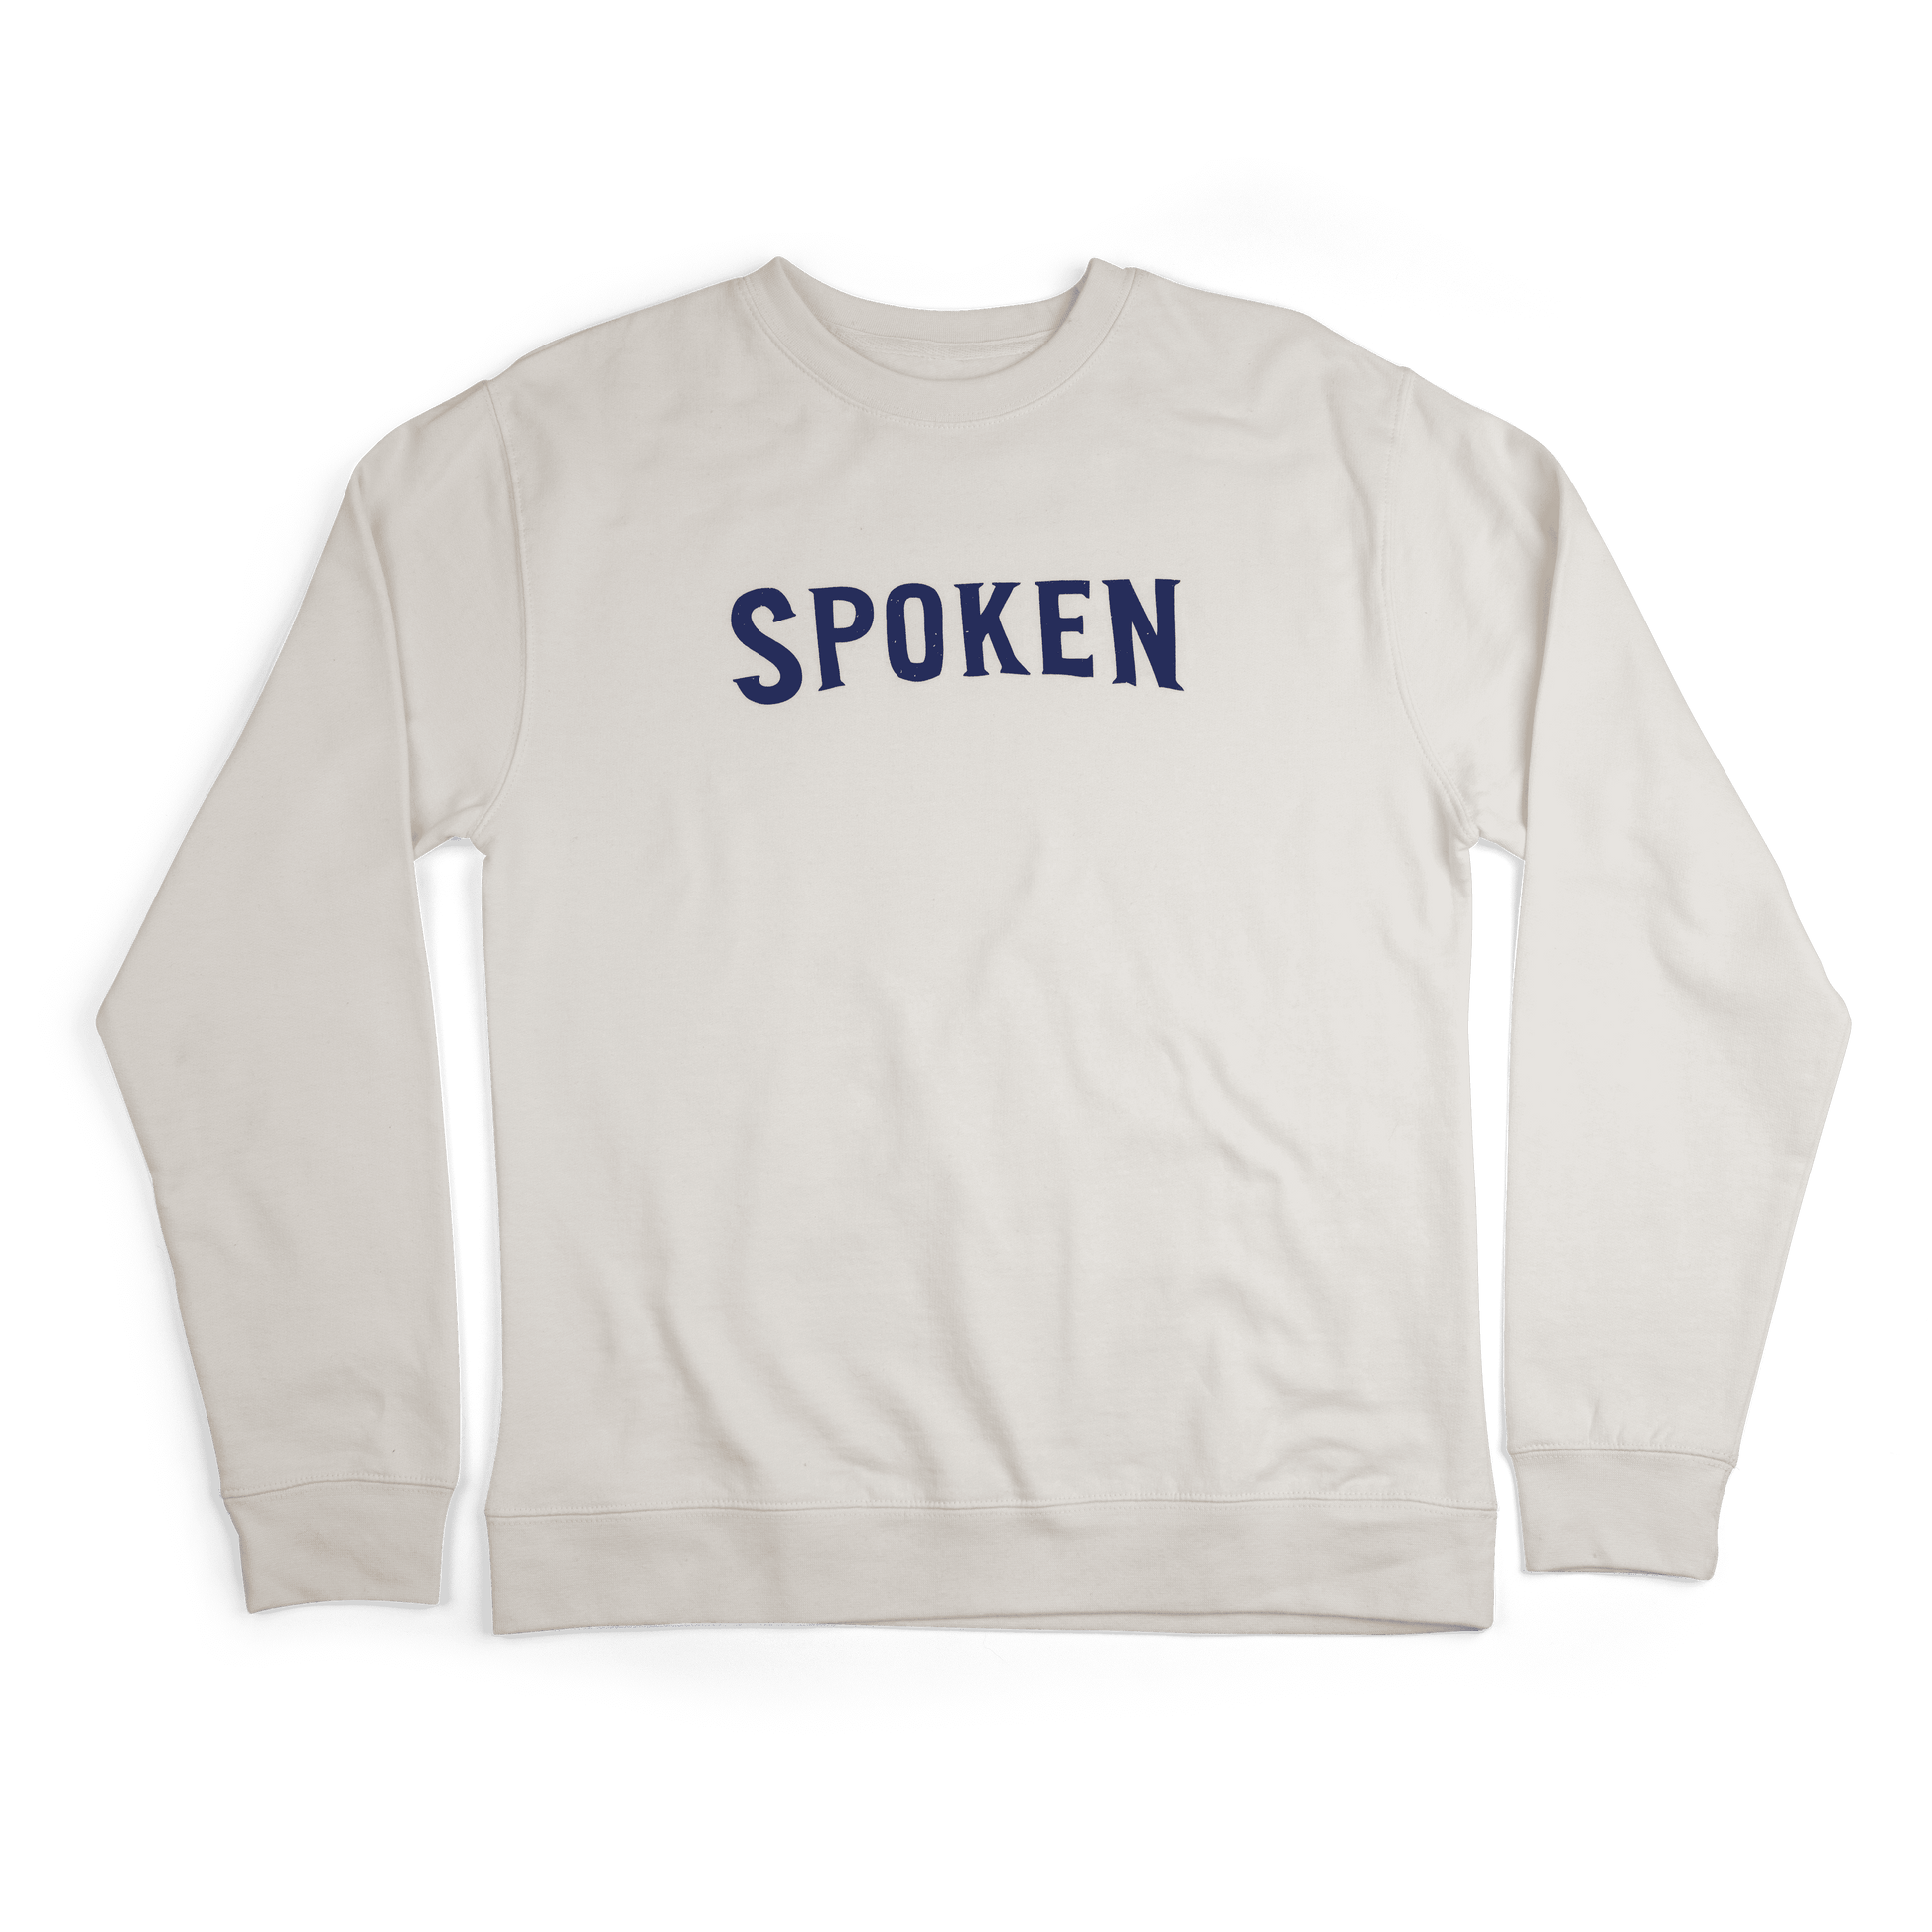 The crewneck from the front: a cream crewneck with blue "Spoken" written on the center of the chest.